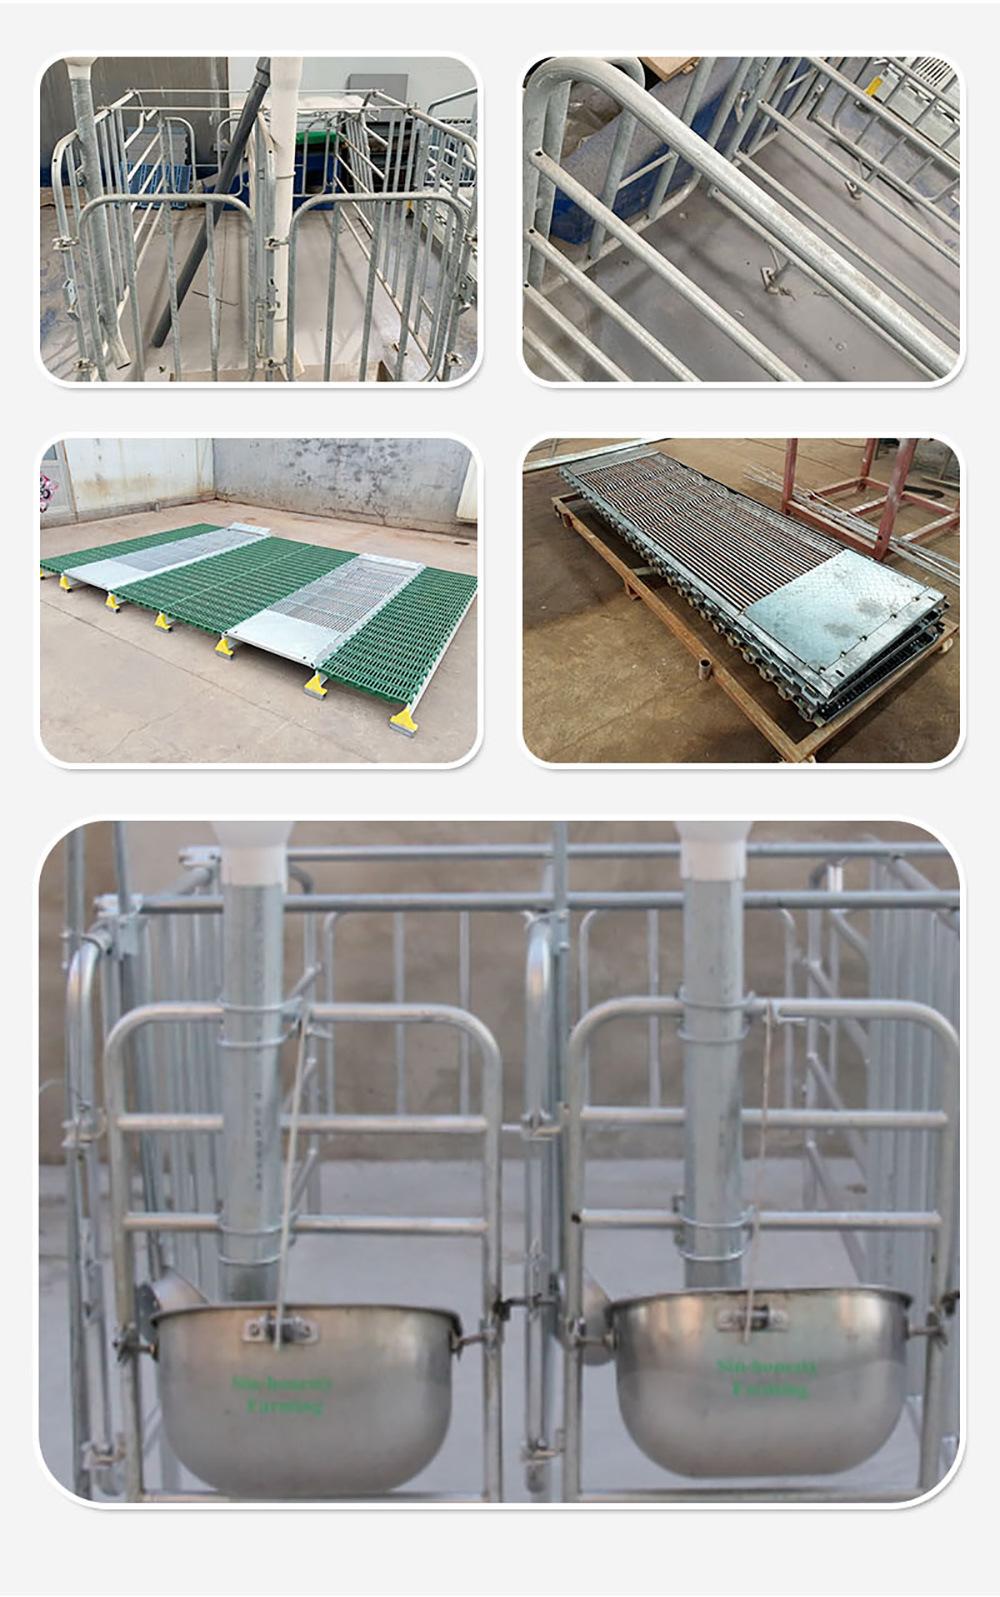 Pig Farrowing Crate/Stall for Pig Farm Equipment